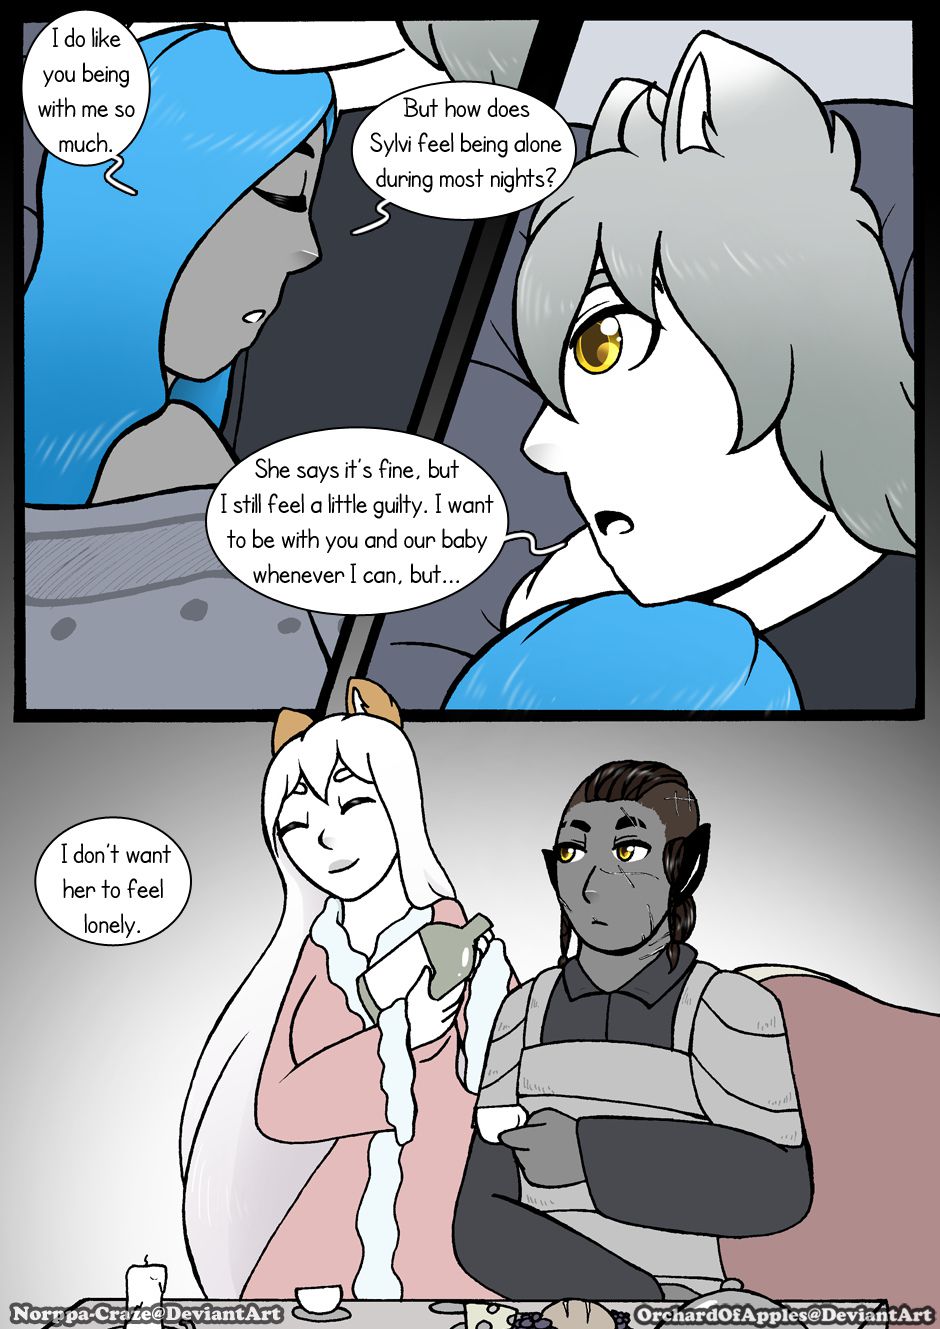 [Jeny-jen94] Between Kings and Queens [Ongoing] 311